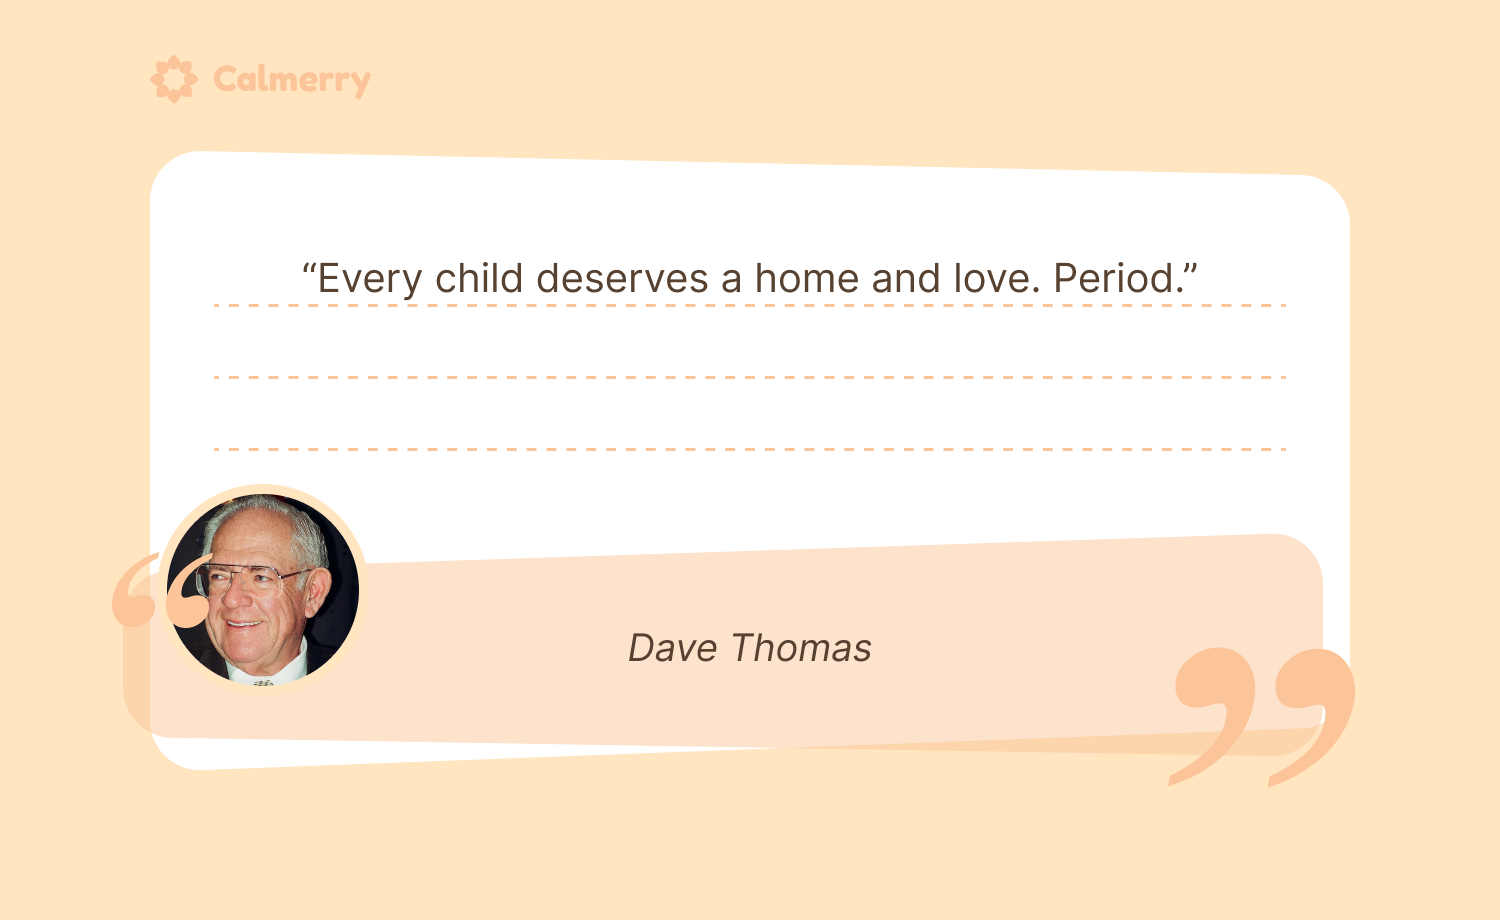 Every child deserves a home and love